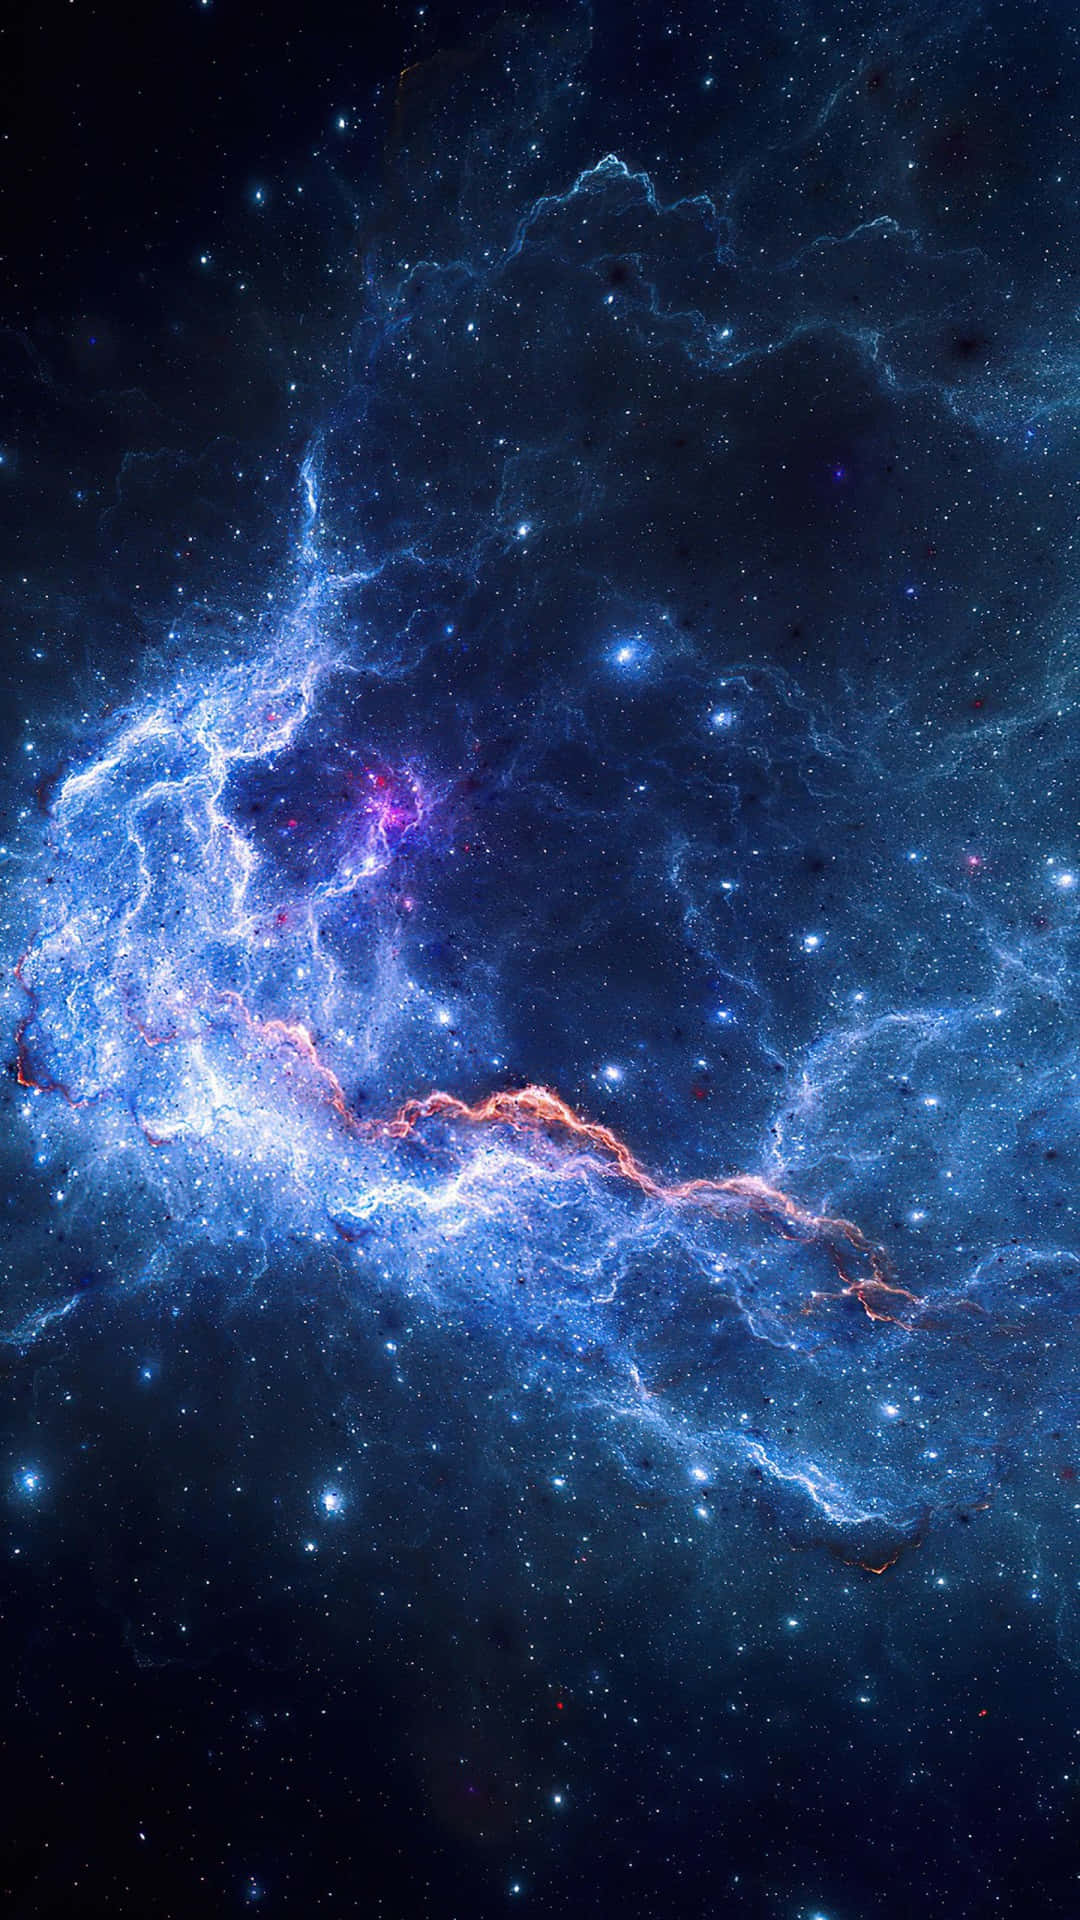 Explore the endless possibilities of Android Space Wallpaper